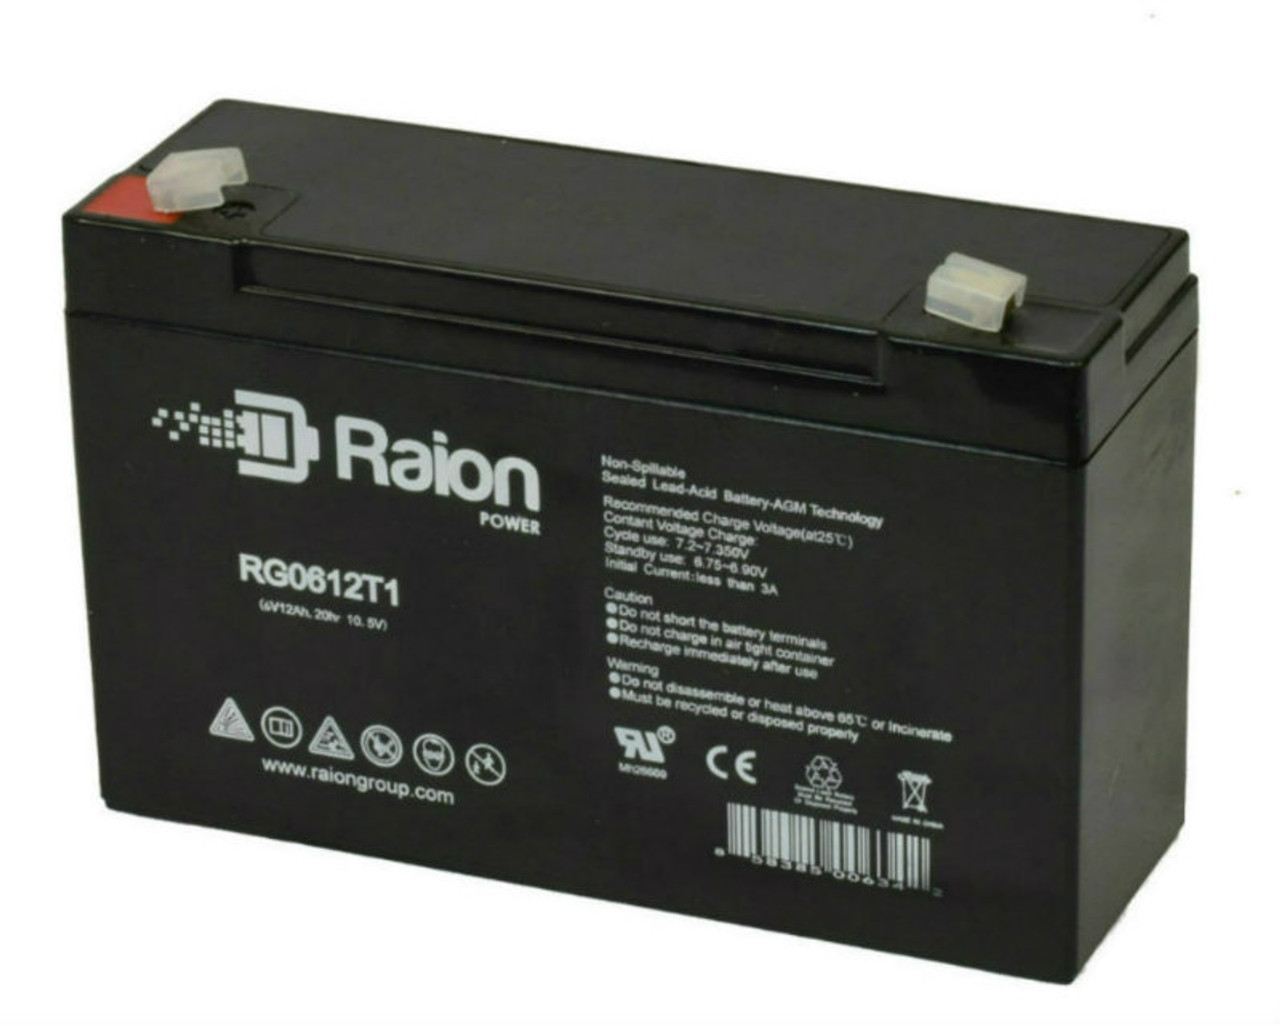 Raion Power RG06120T1 Replacement Battery for Mobilizer 5Patient Transport Medical Equipment